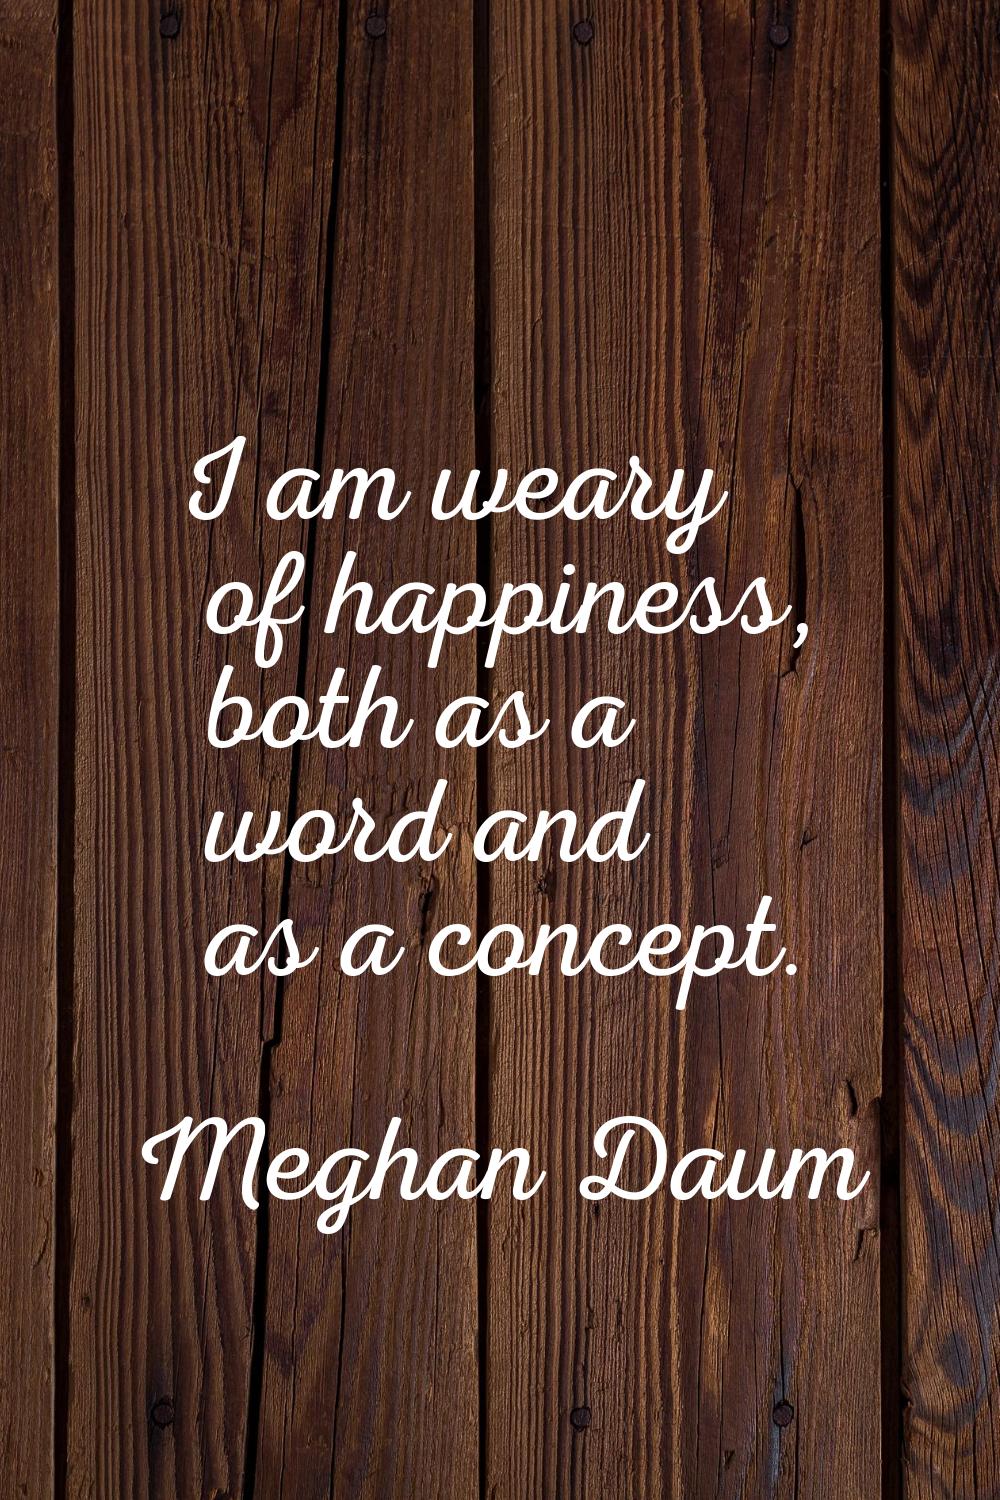 I am weary of happiness, both as a word and as a concept.